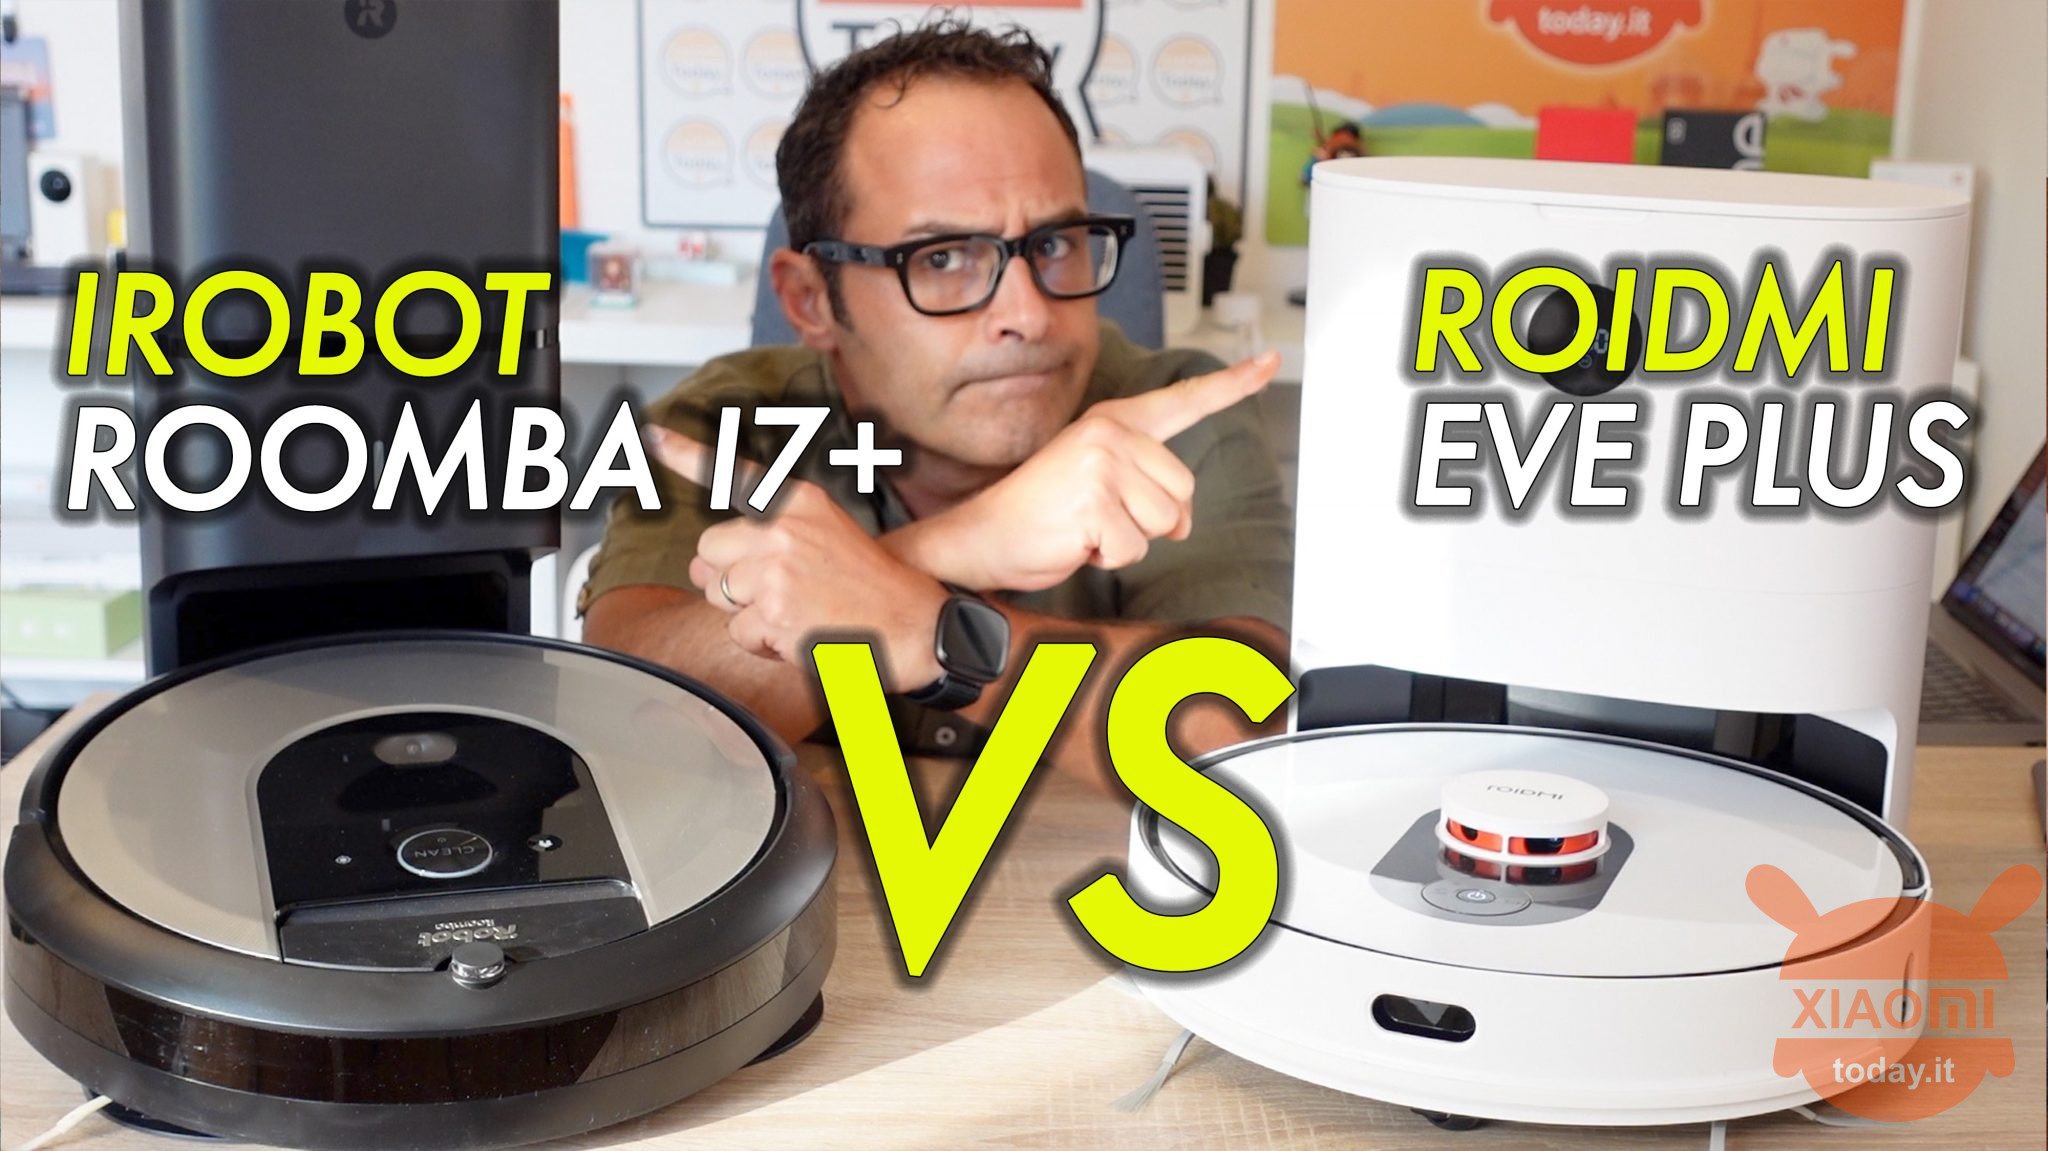 Pensioneret kande menu Roidmi Eve Plus vs iRobot Roomba i7 + It costs half and is better |  XiaomiToday.it